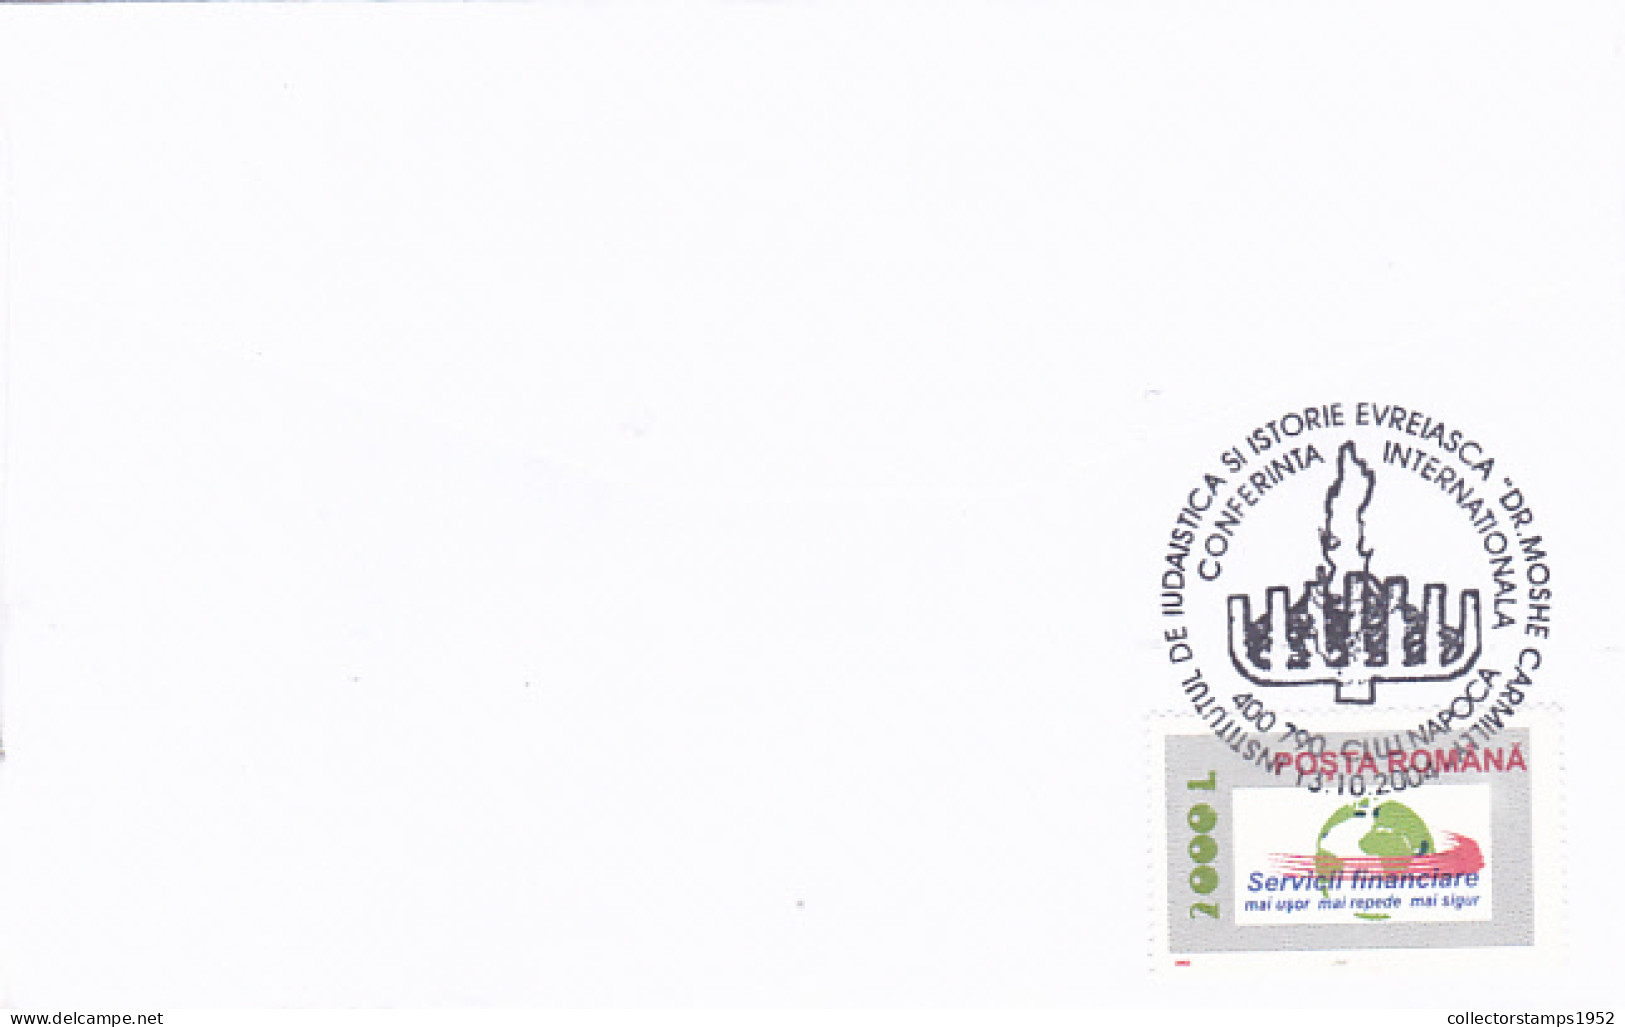 MOSHE CARMILLY JEWISH INSTITUTE, CONFERENCE, JEWISH, RELIGION, SPECIAL COVER, OVERPRINT STAMP, 2004, ROMANIA - Judaisme